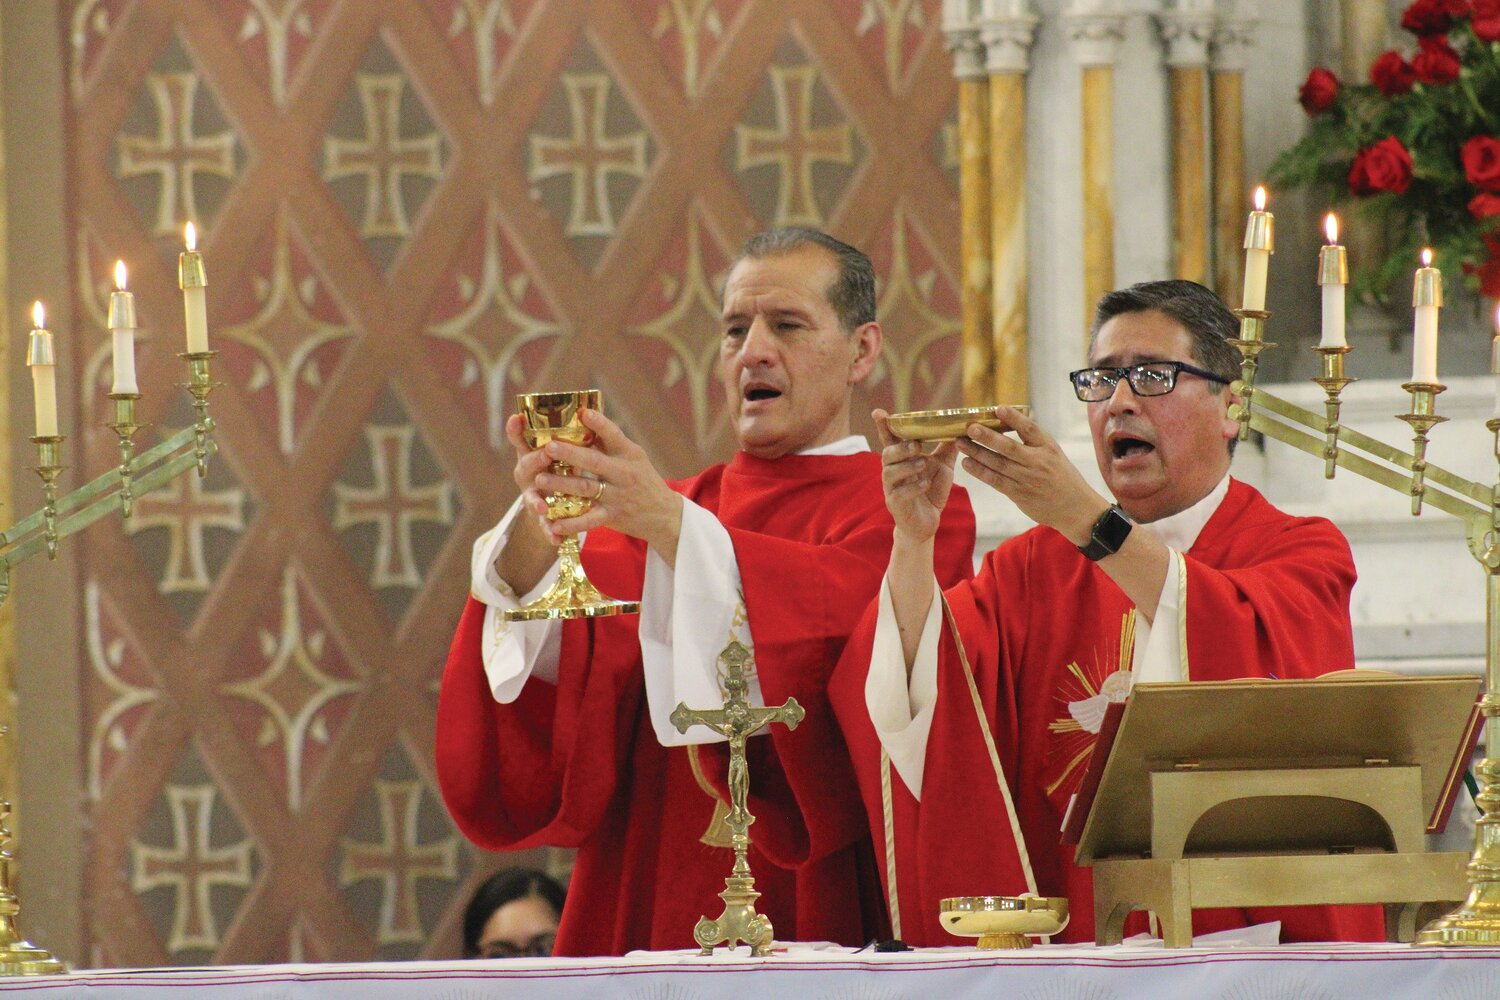 Parishioners and clergy of St. Charles Borromeo Church in Providence celebrate the Solemnity of Pentecost on Sunday, May 28. This Mass comes on the heels of an all-night prayer service that took place in preparation for the Solemnity of Pentecost.